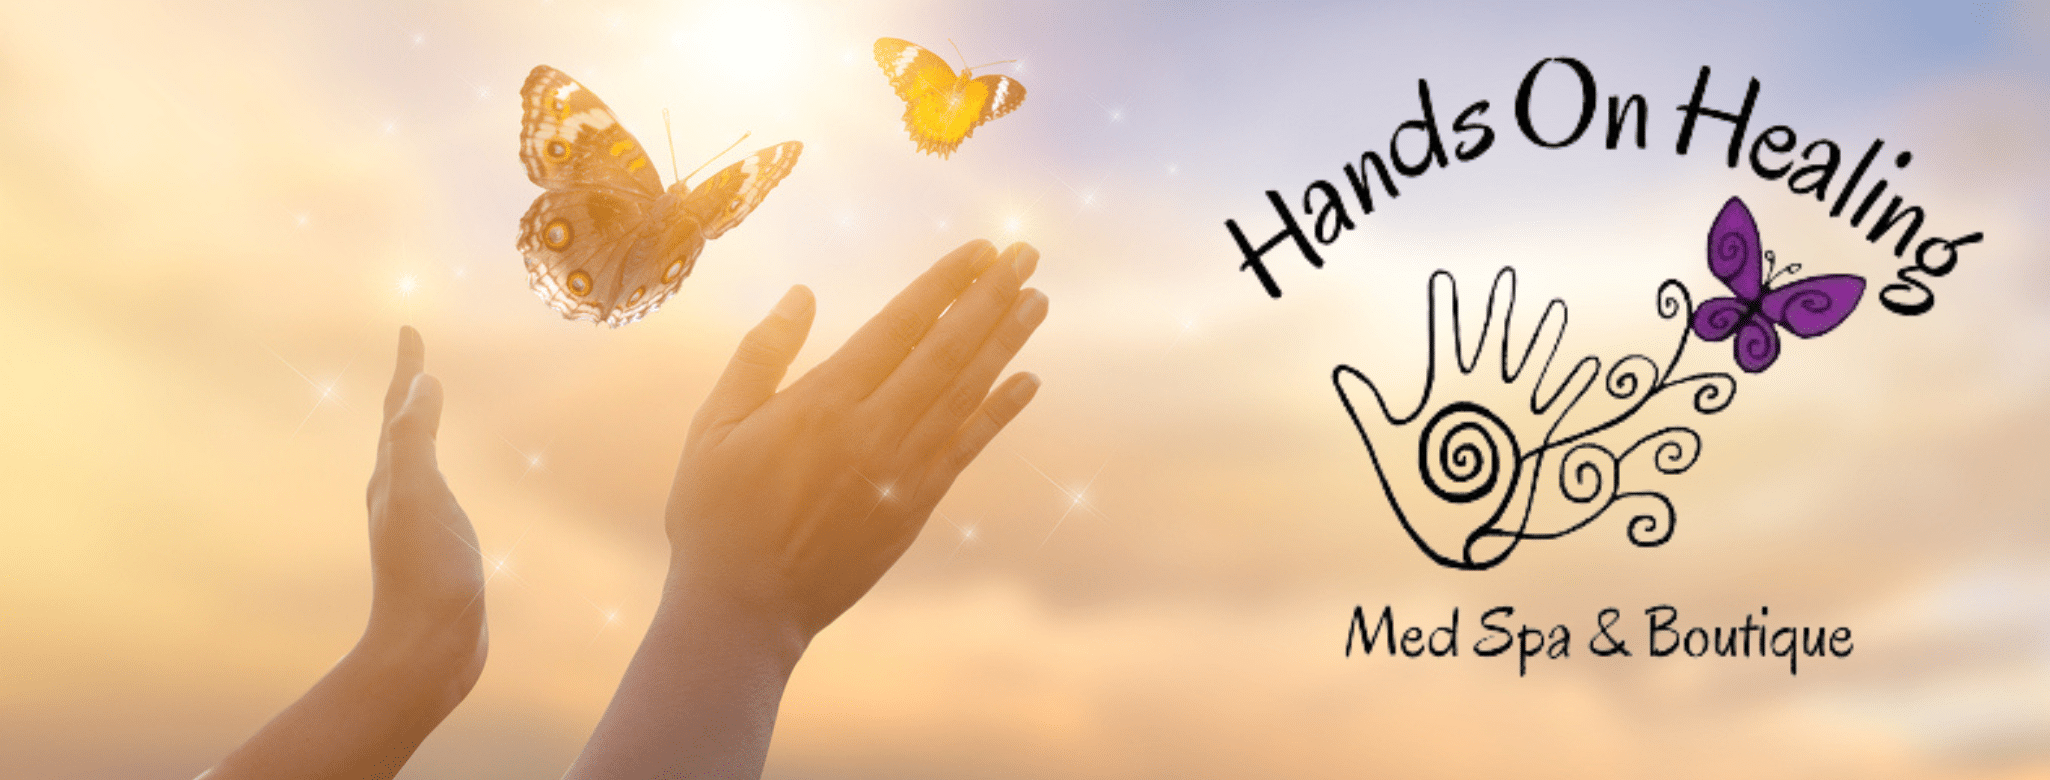 Hands On Healing a beautiful change it's time to fly